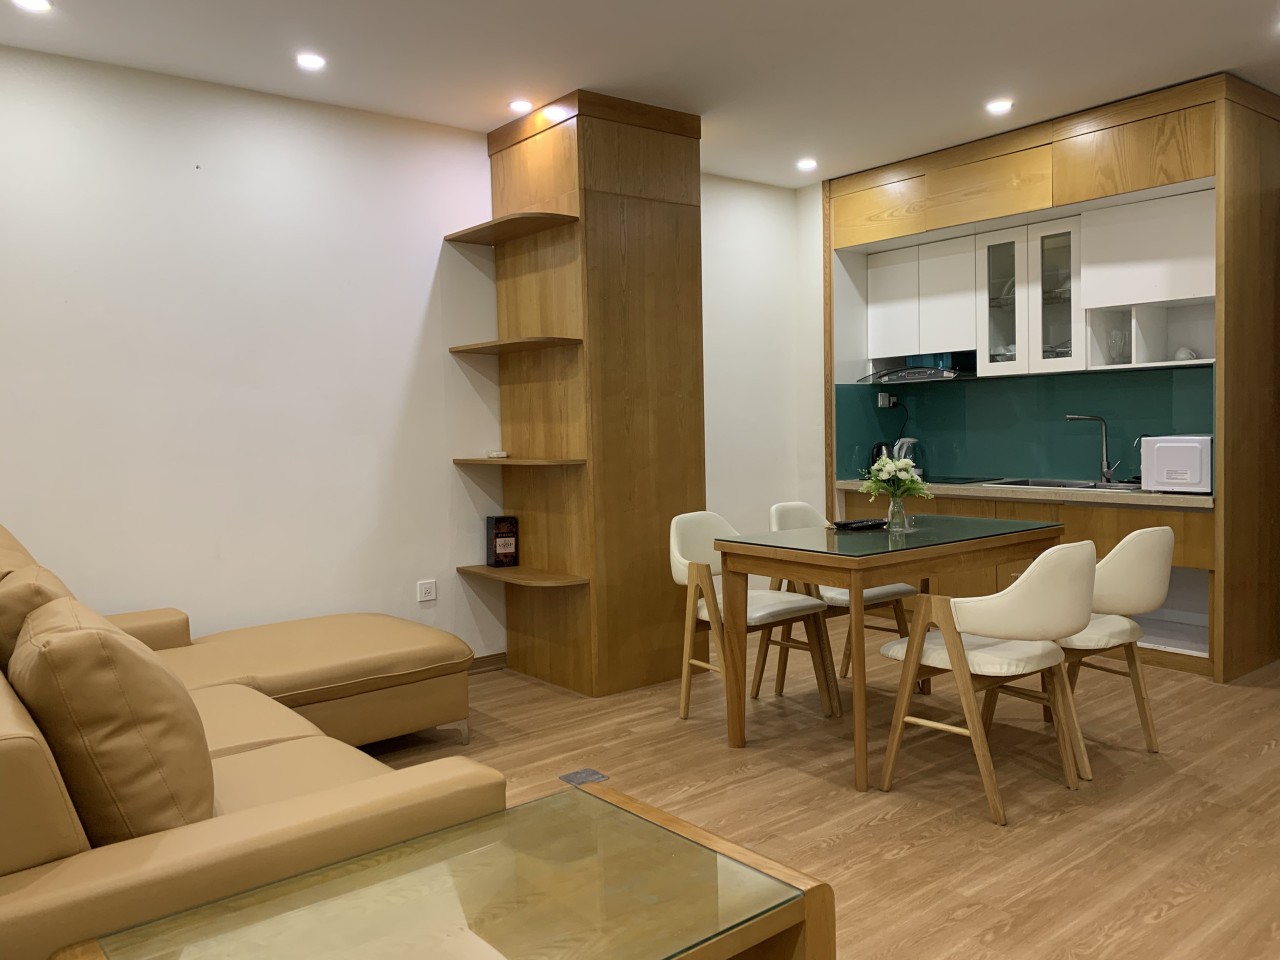 Modern and Yong Design 2 Bedroom Apartment For Rent in Nhat Chieu str, Tay Ho, Budget Price